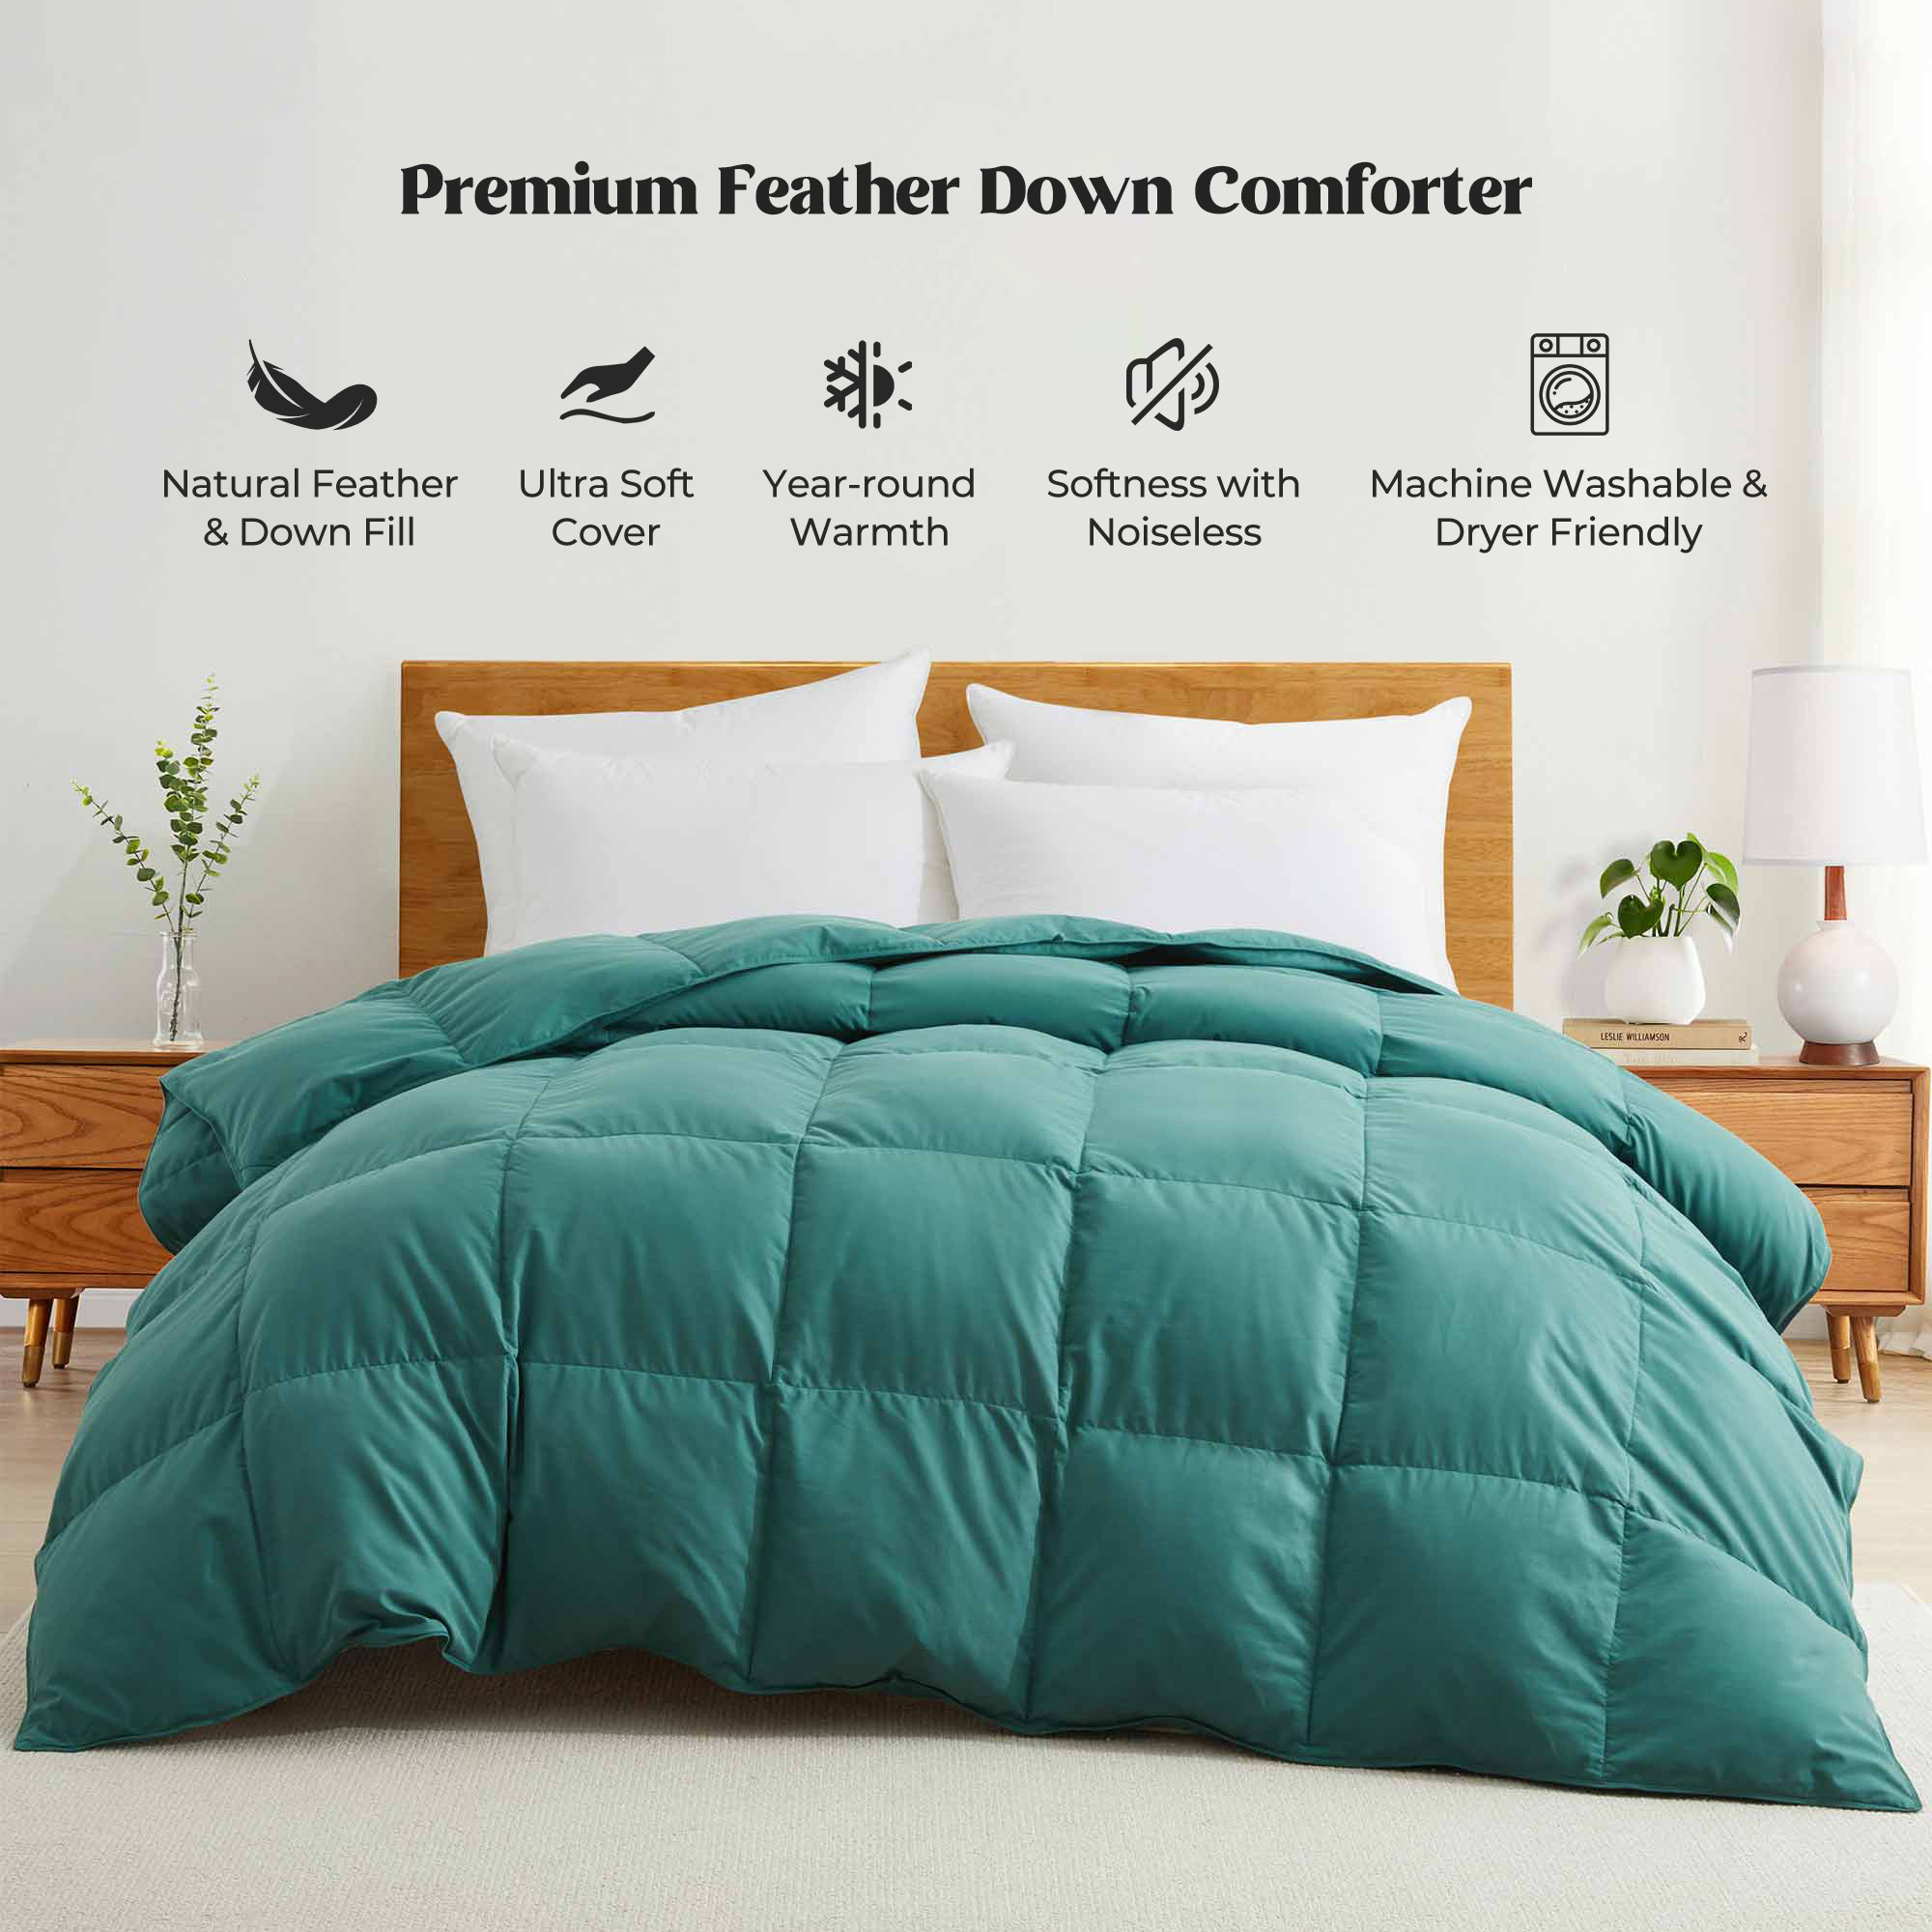 All Seasons Goose Down Feather Comforter Ultra Soft Comforter With Peach Skin Fabric - Laurel Green, Full/Queen-88*88